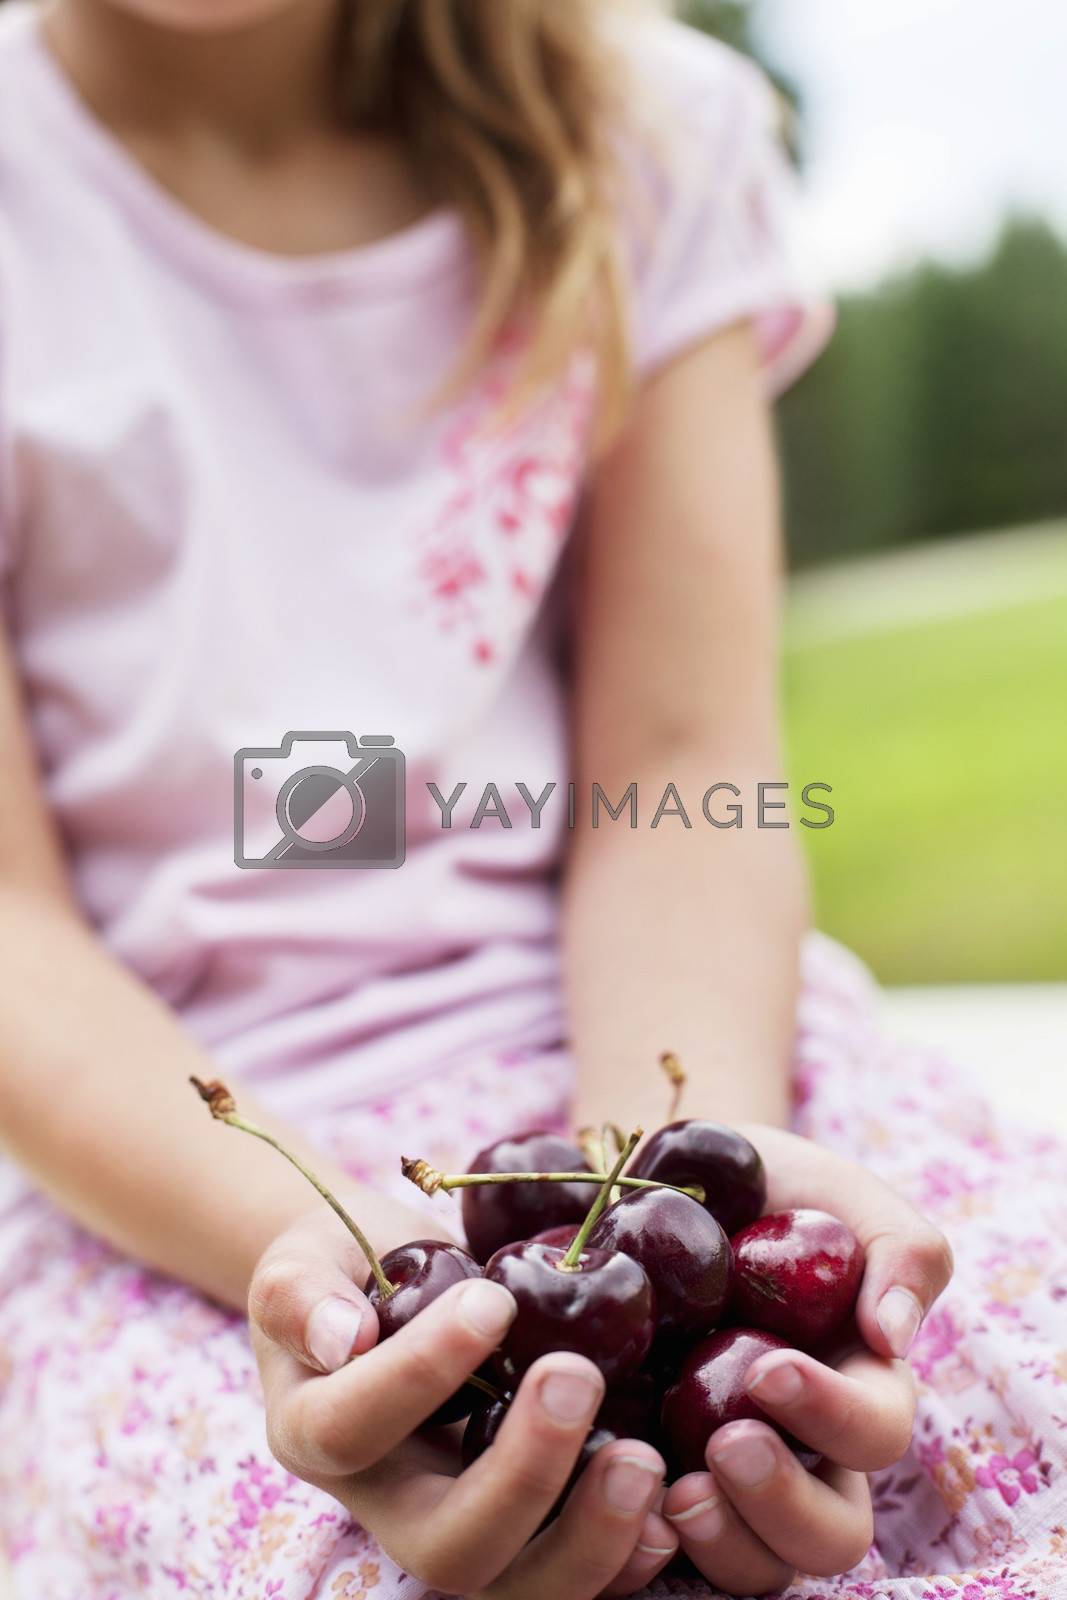 Royalty free image of Close-up of hands full with bing cherries by moodboard